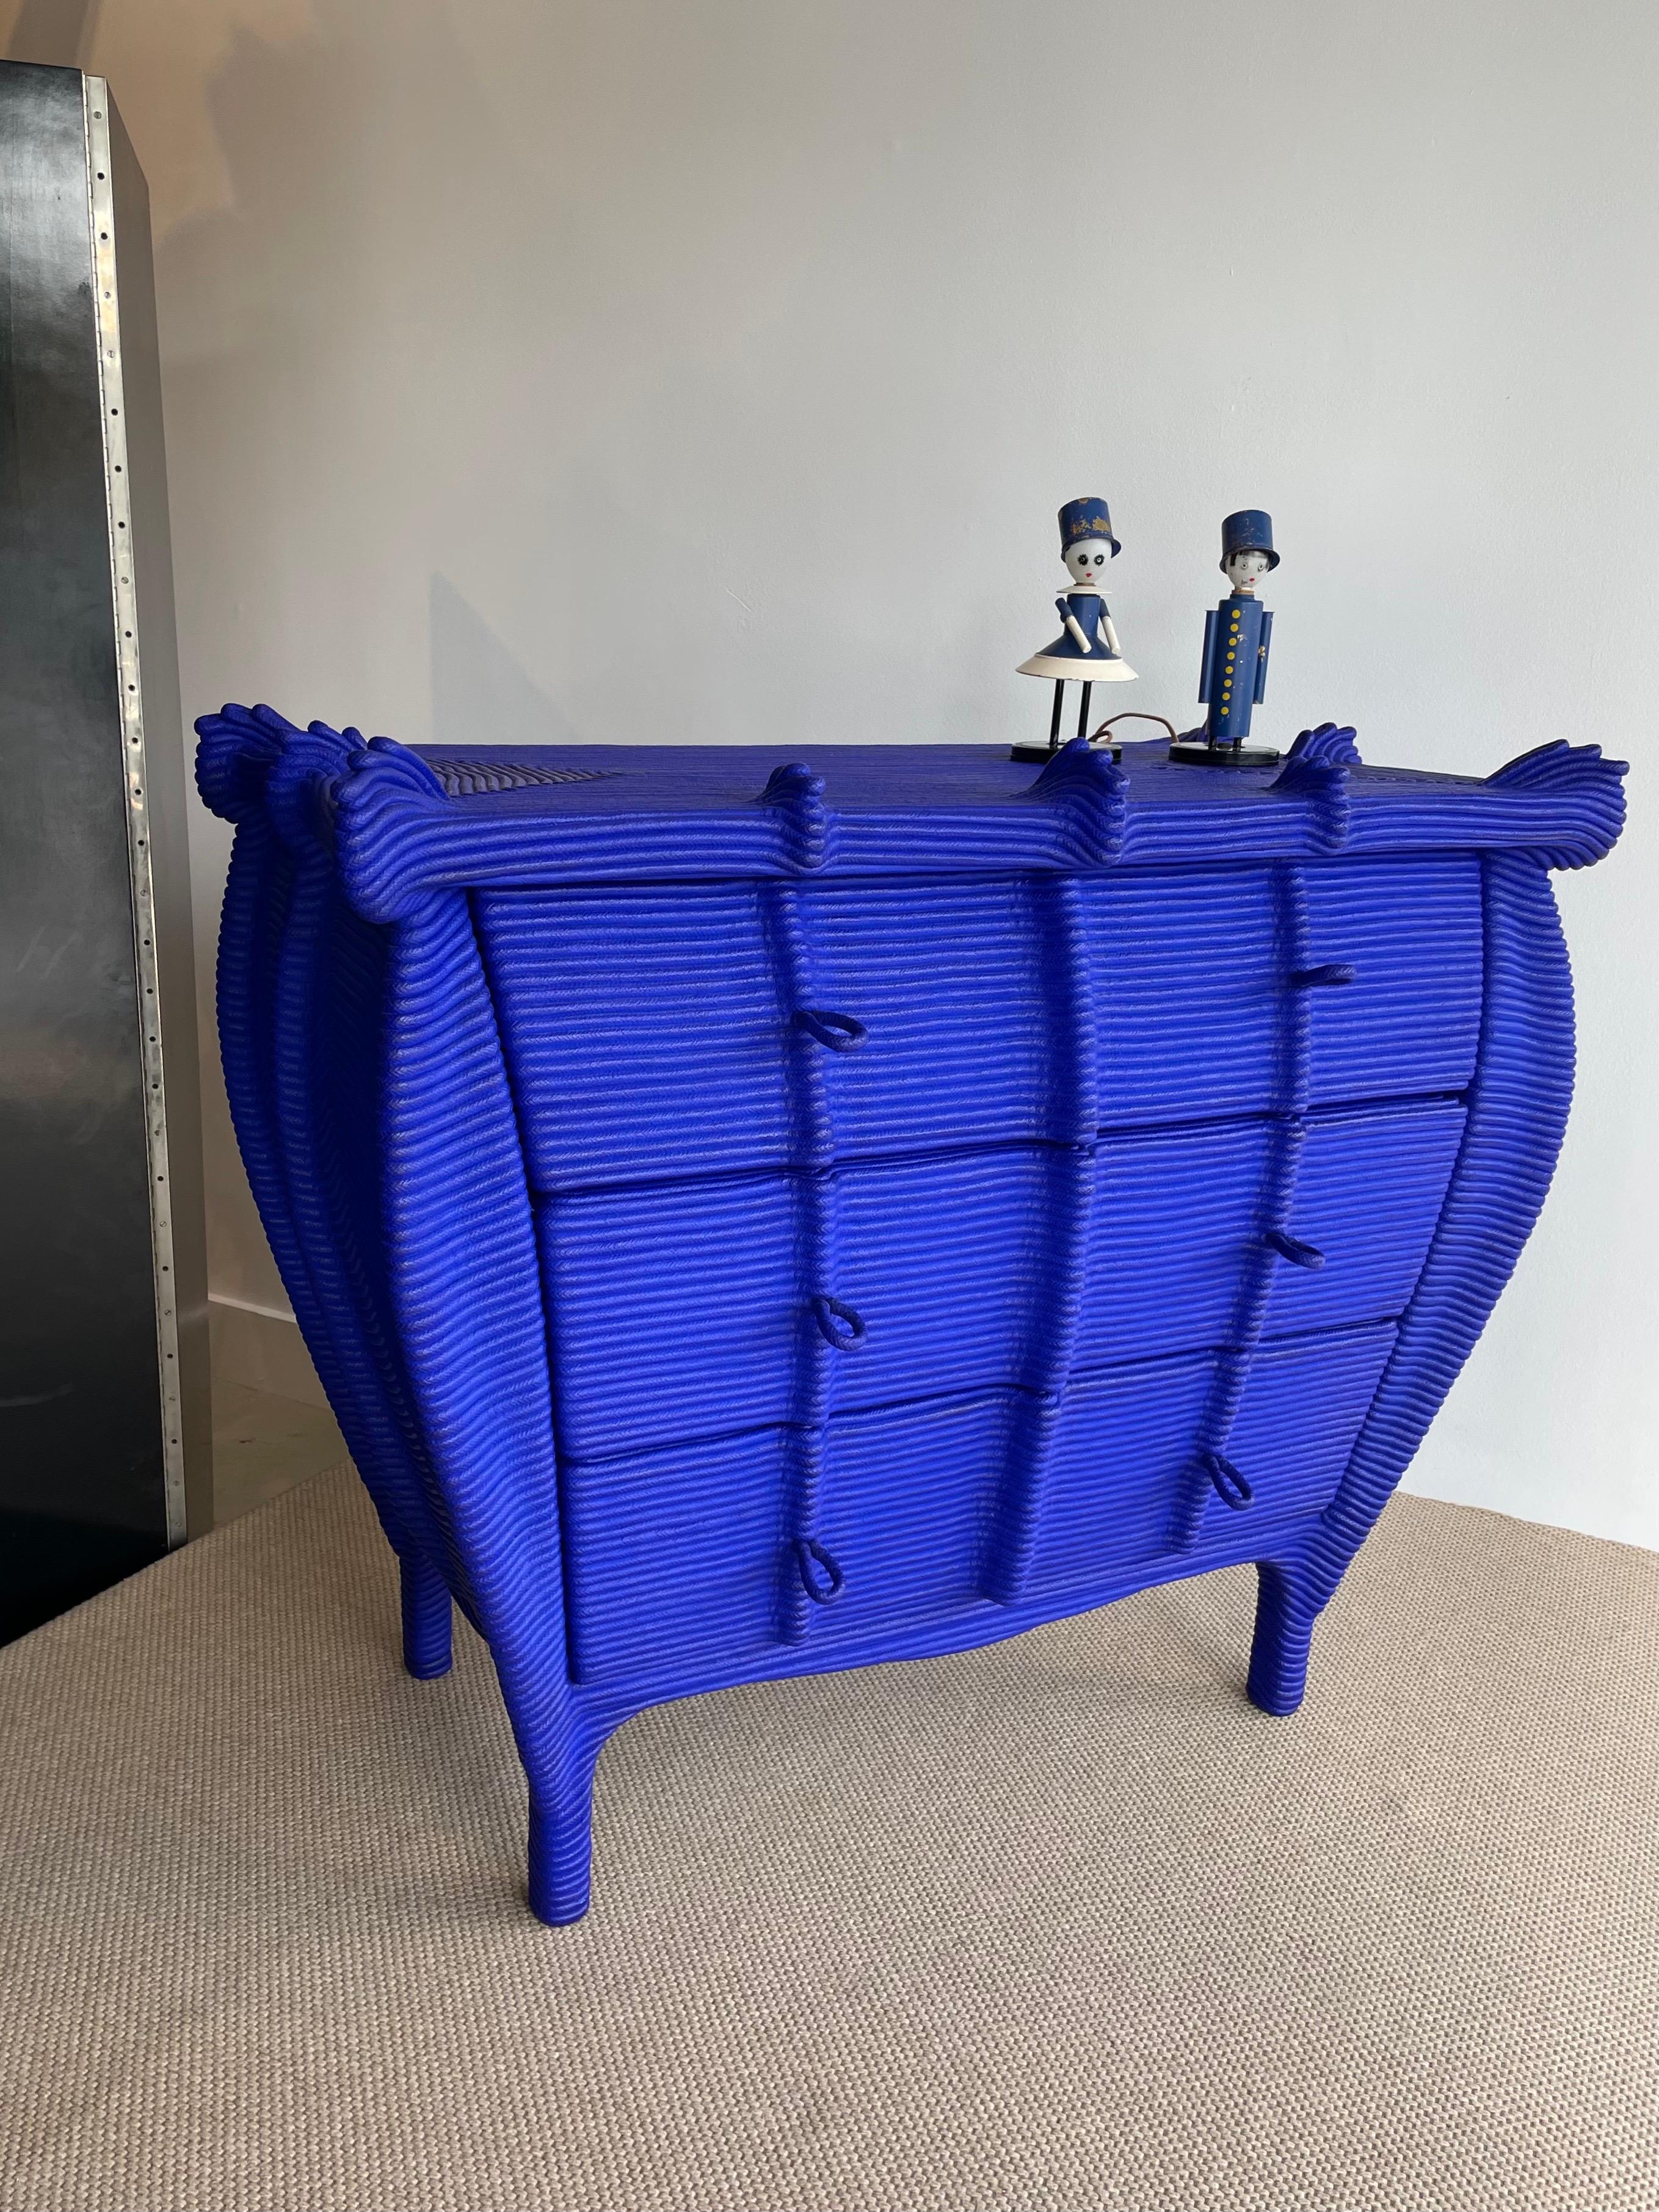 Yves Klein vivid blue rope clad cabinet with 3 drawers and rope pulls. All original and in amazing condition. This is a beauty!

Visual artist born (1946) and living in Paris, his work focuses on a roundabout but ingenious use of everyday